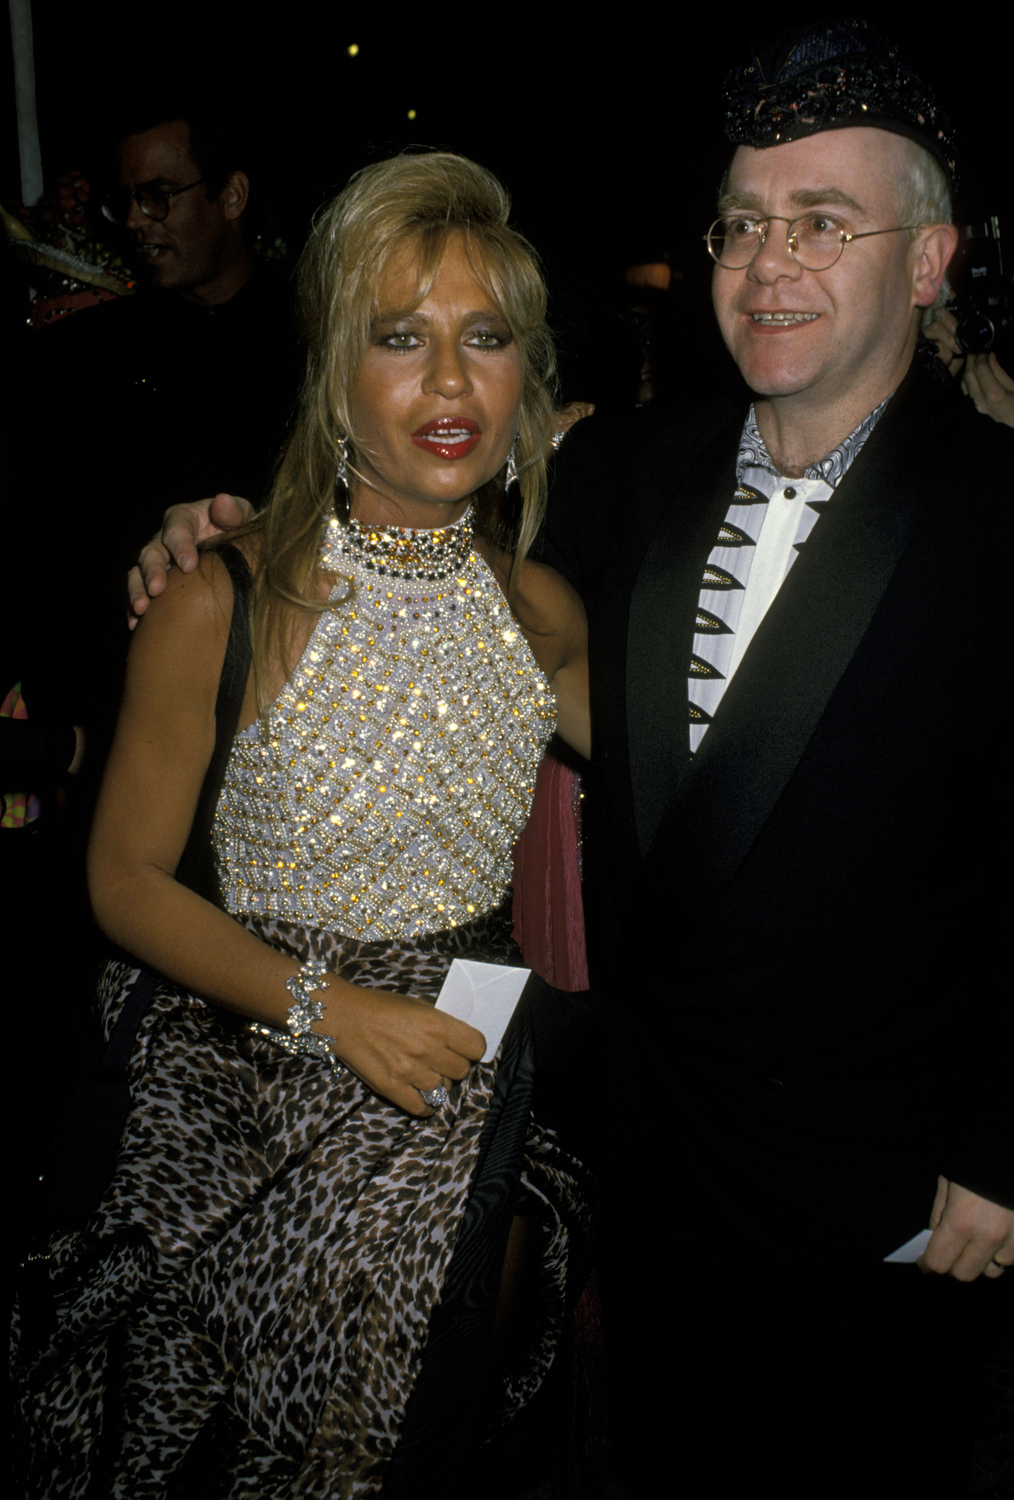 Donatella and Gianni Versace, 1990: A Look Back